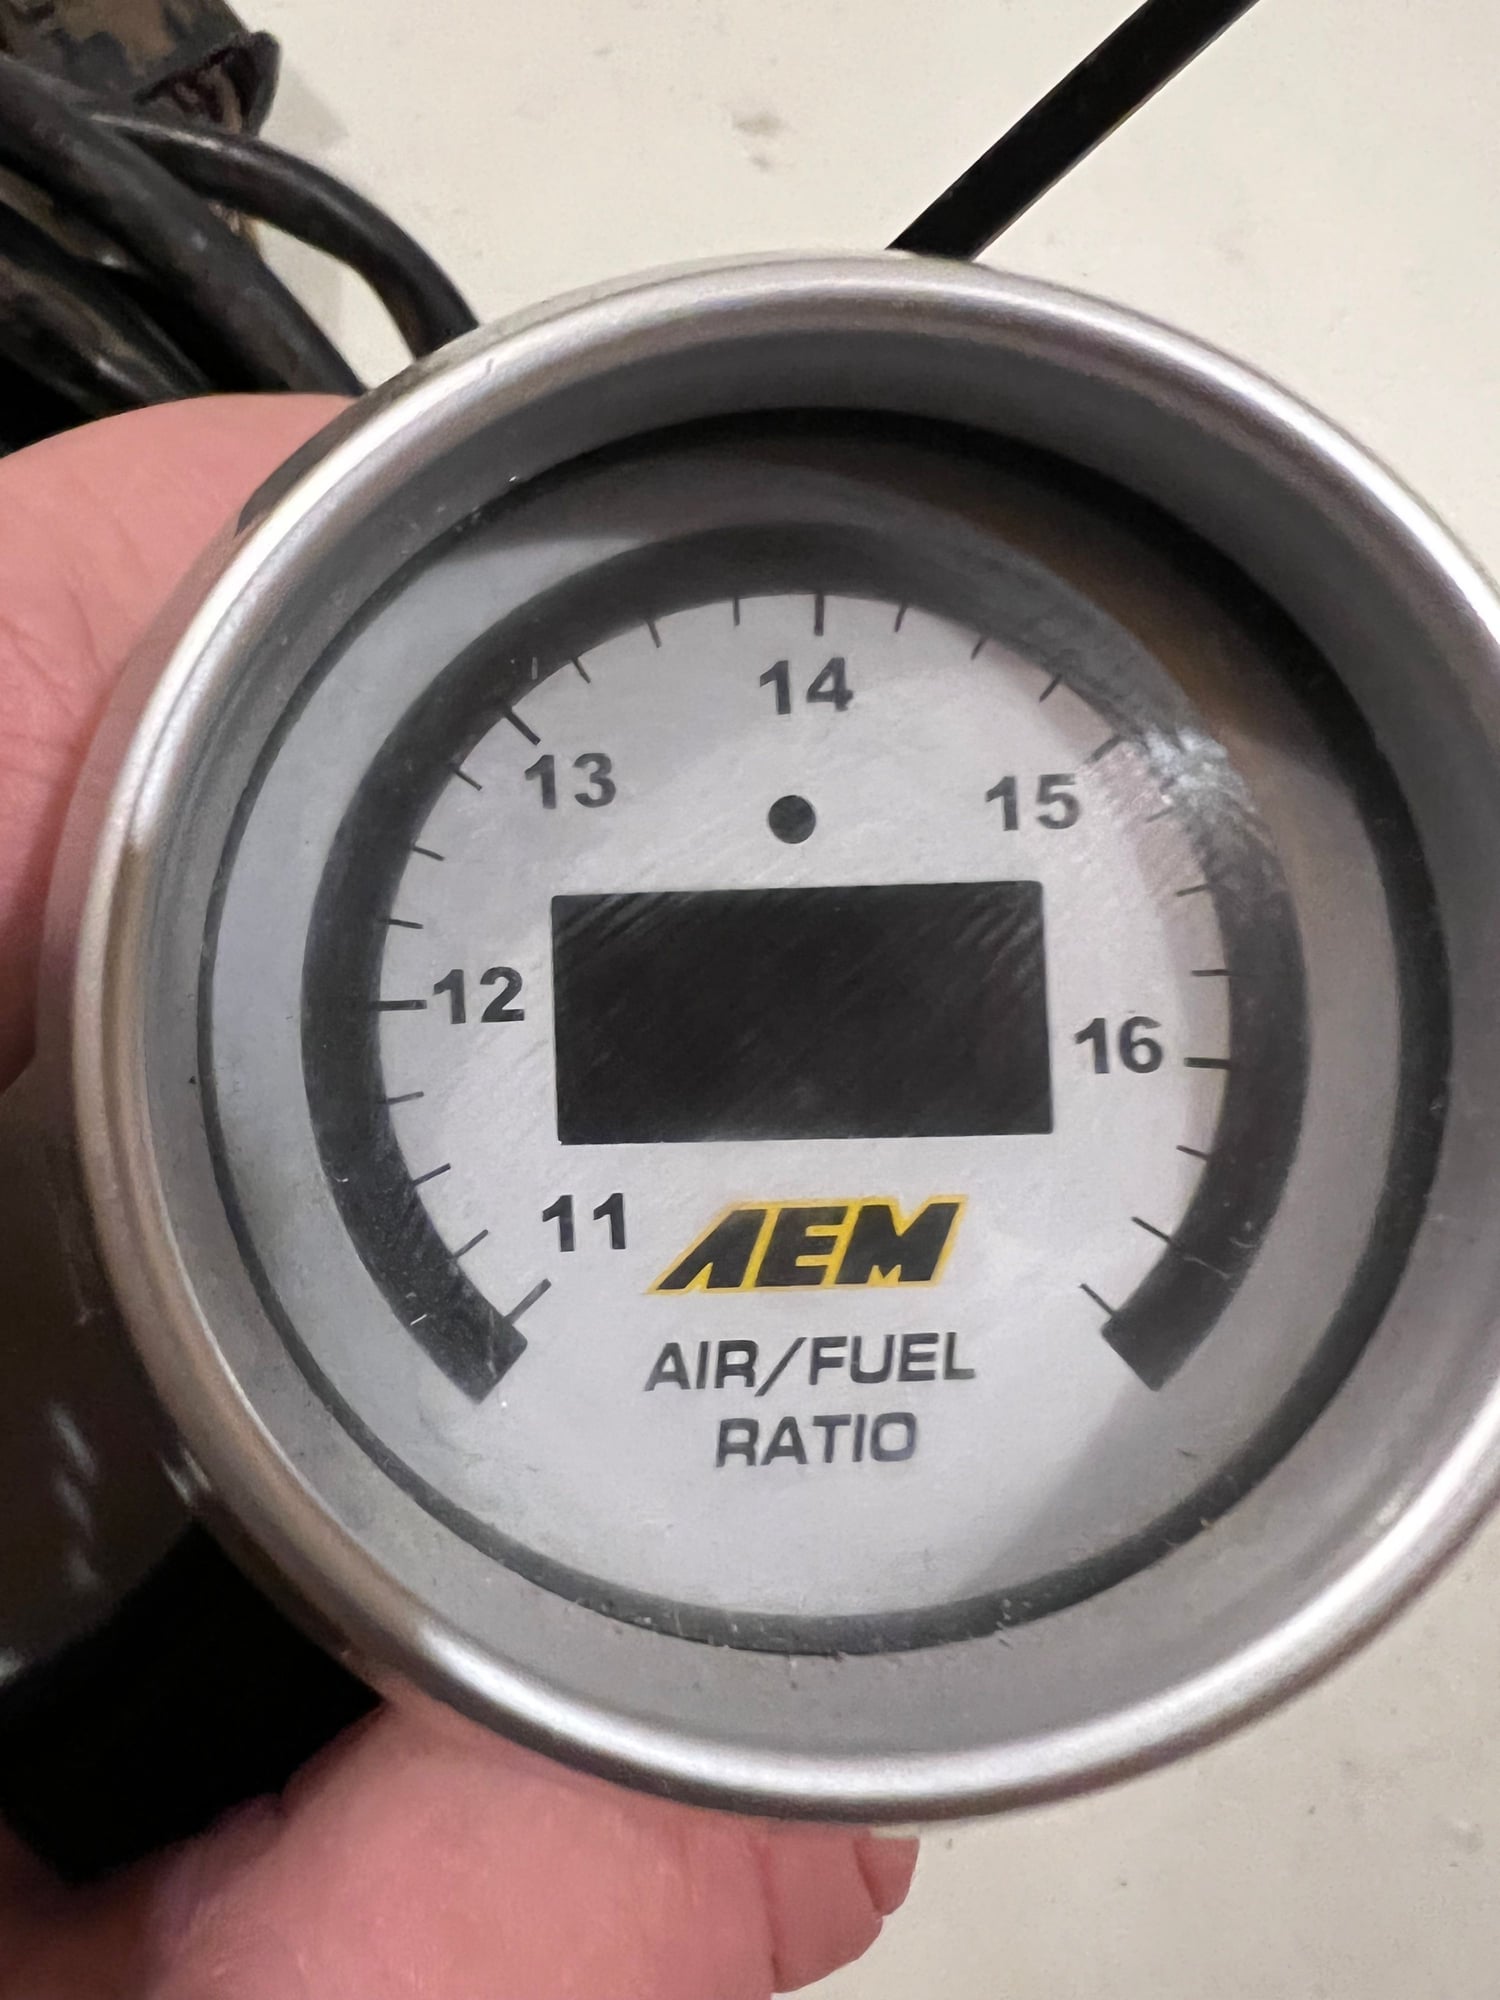 Accessories - AEM Uego wideband - SOLD - Used - 0  All Models - Streator, IL 61364, United States